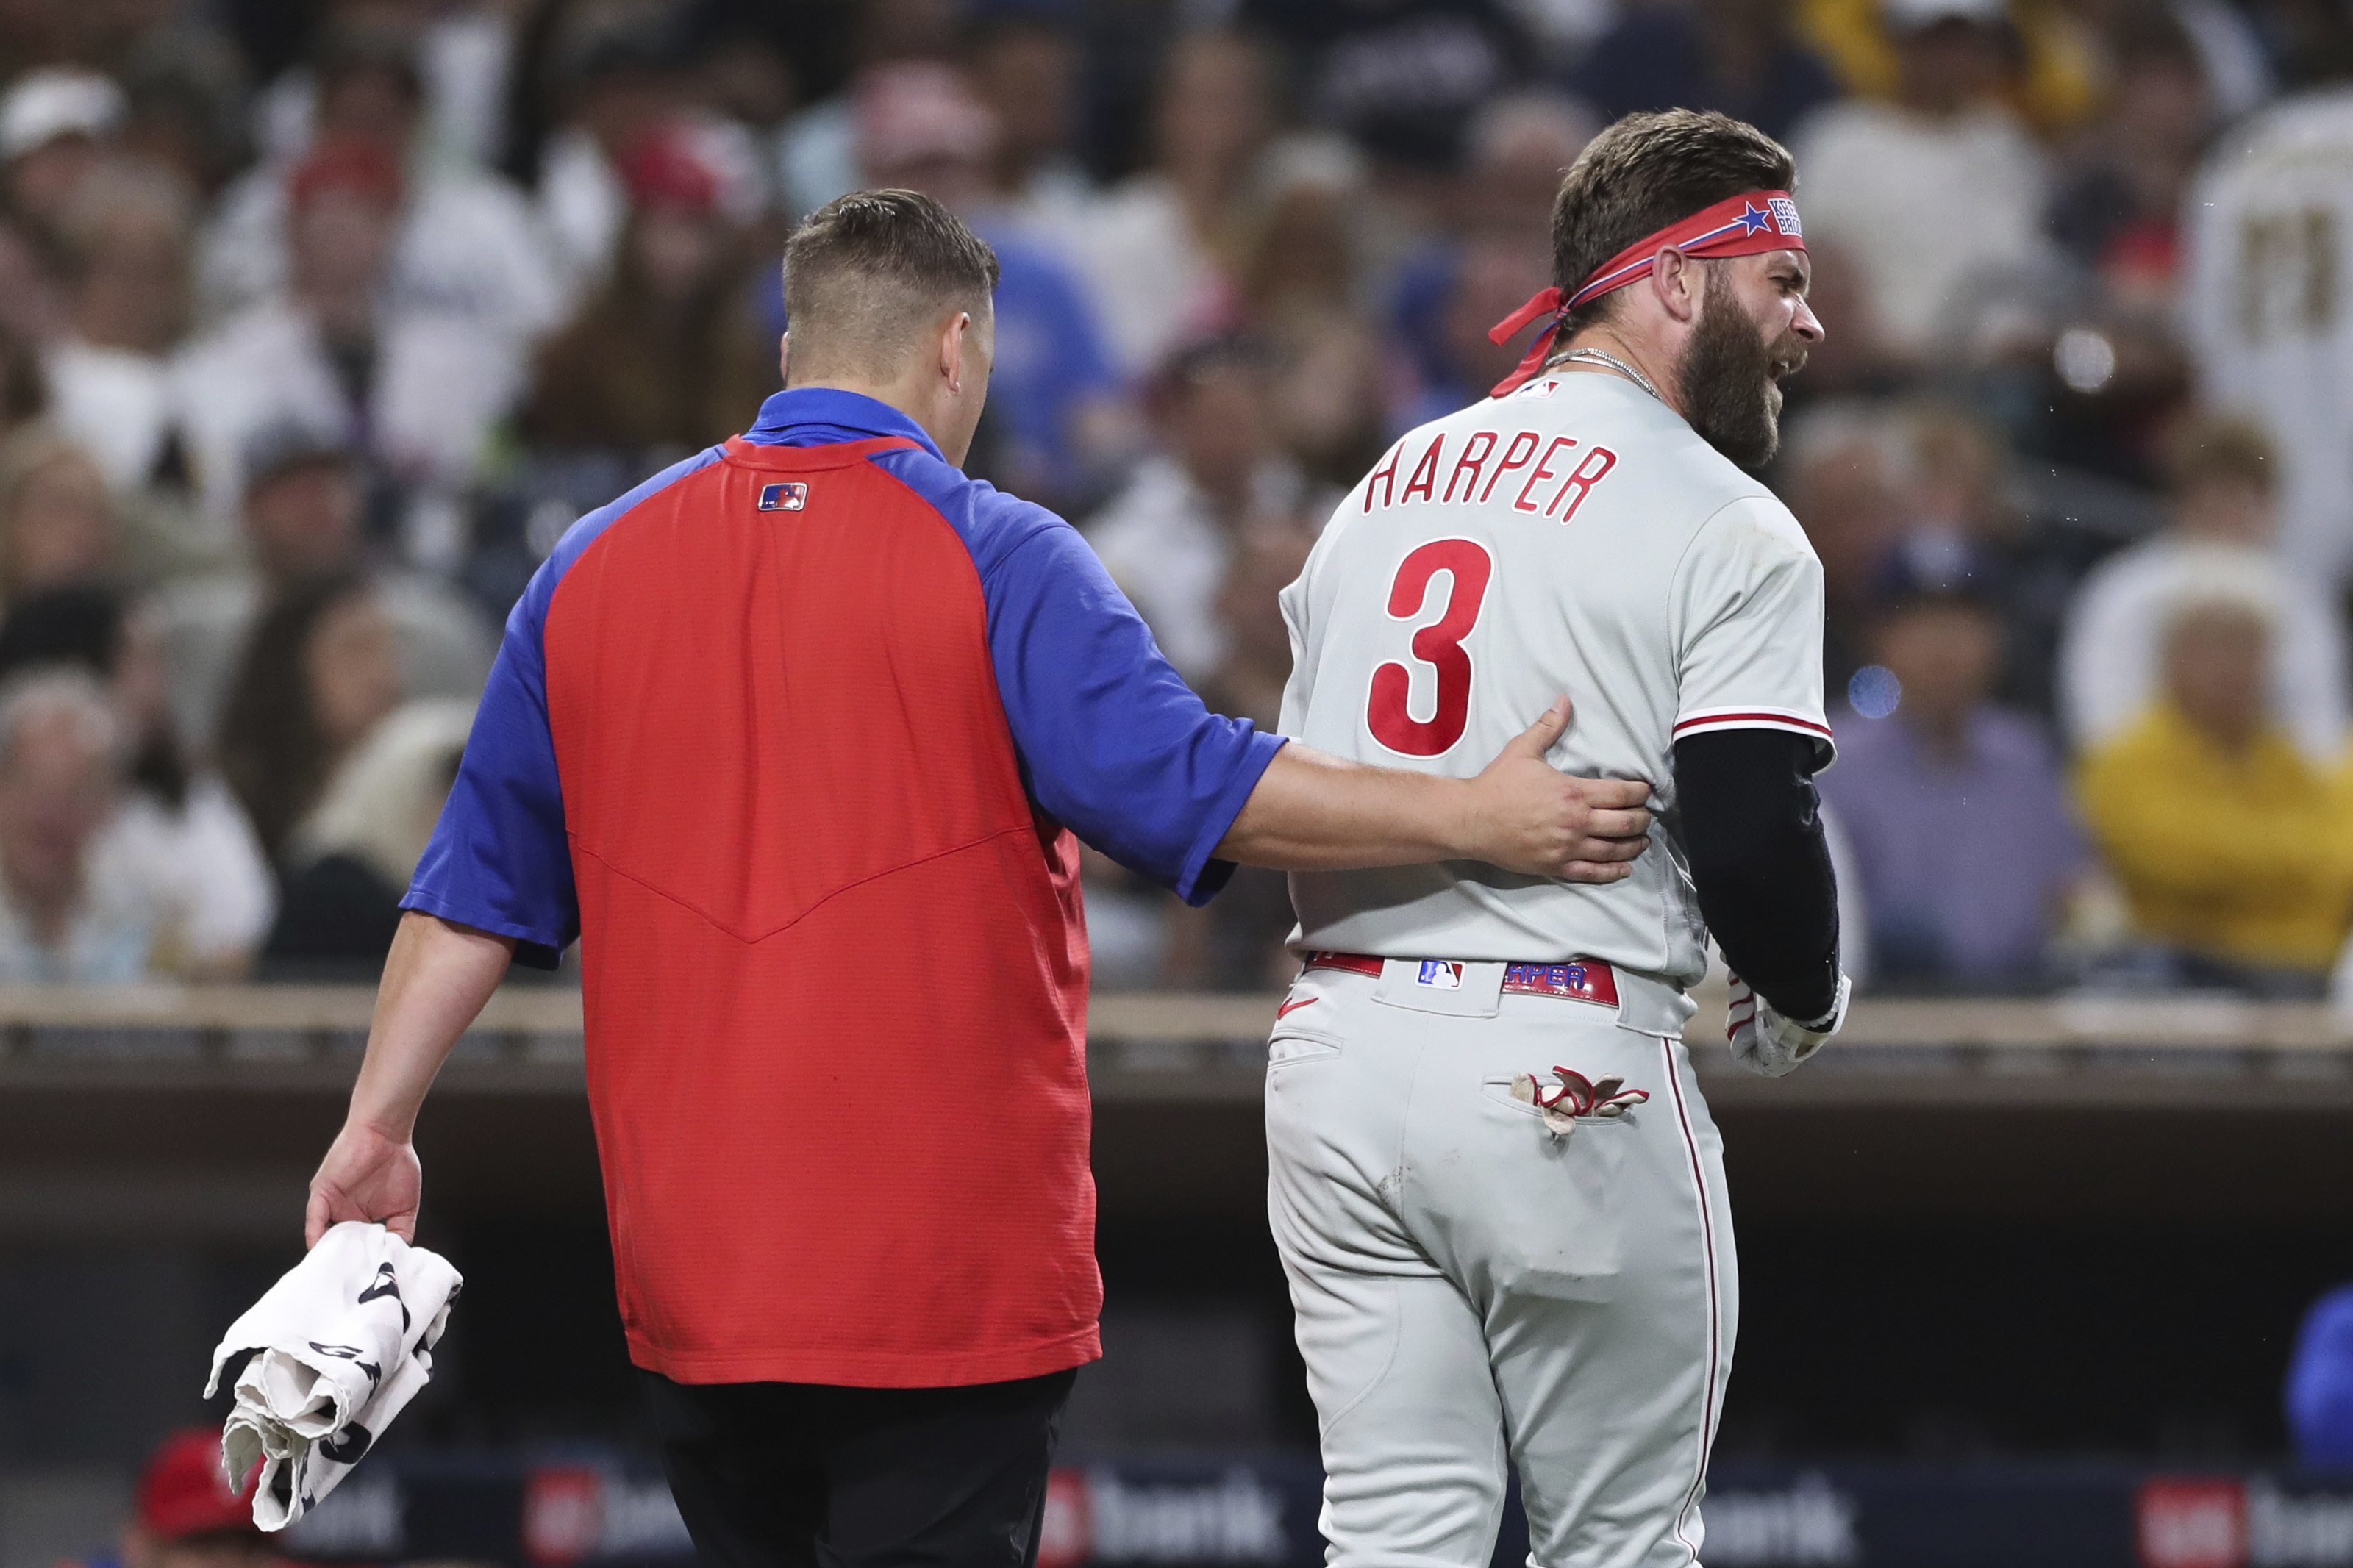 Adam Duvall injury update: Red Sox OF fractured wrist, out indefinitely